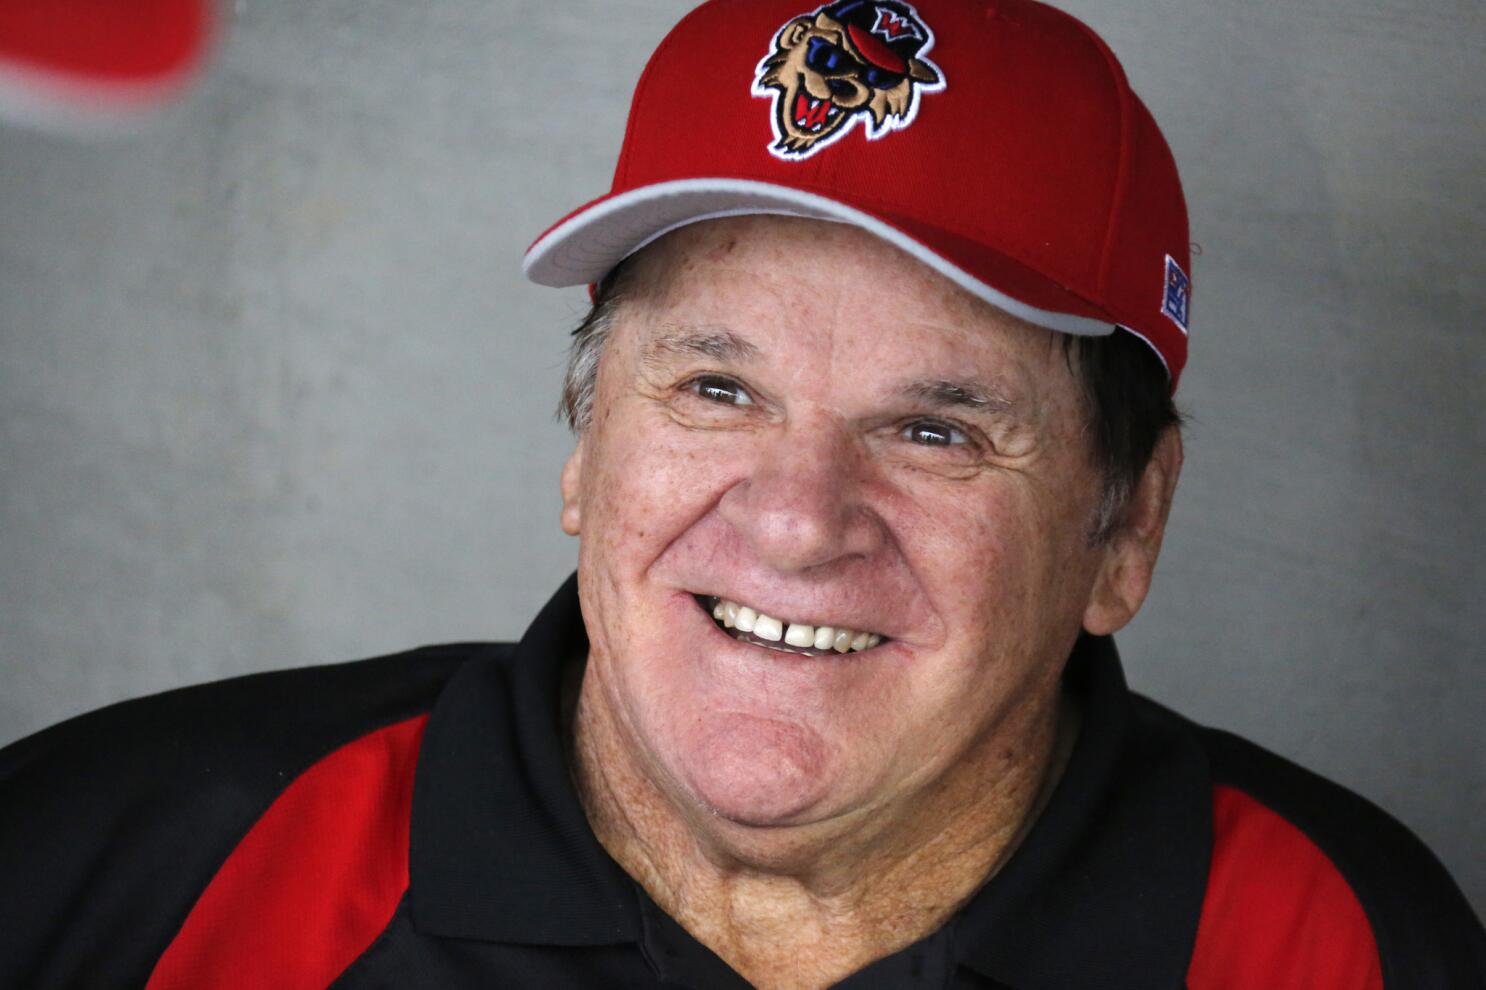 Pete Rose once again asks for Hall of Fame consideration in letter to MLB